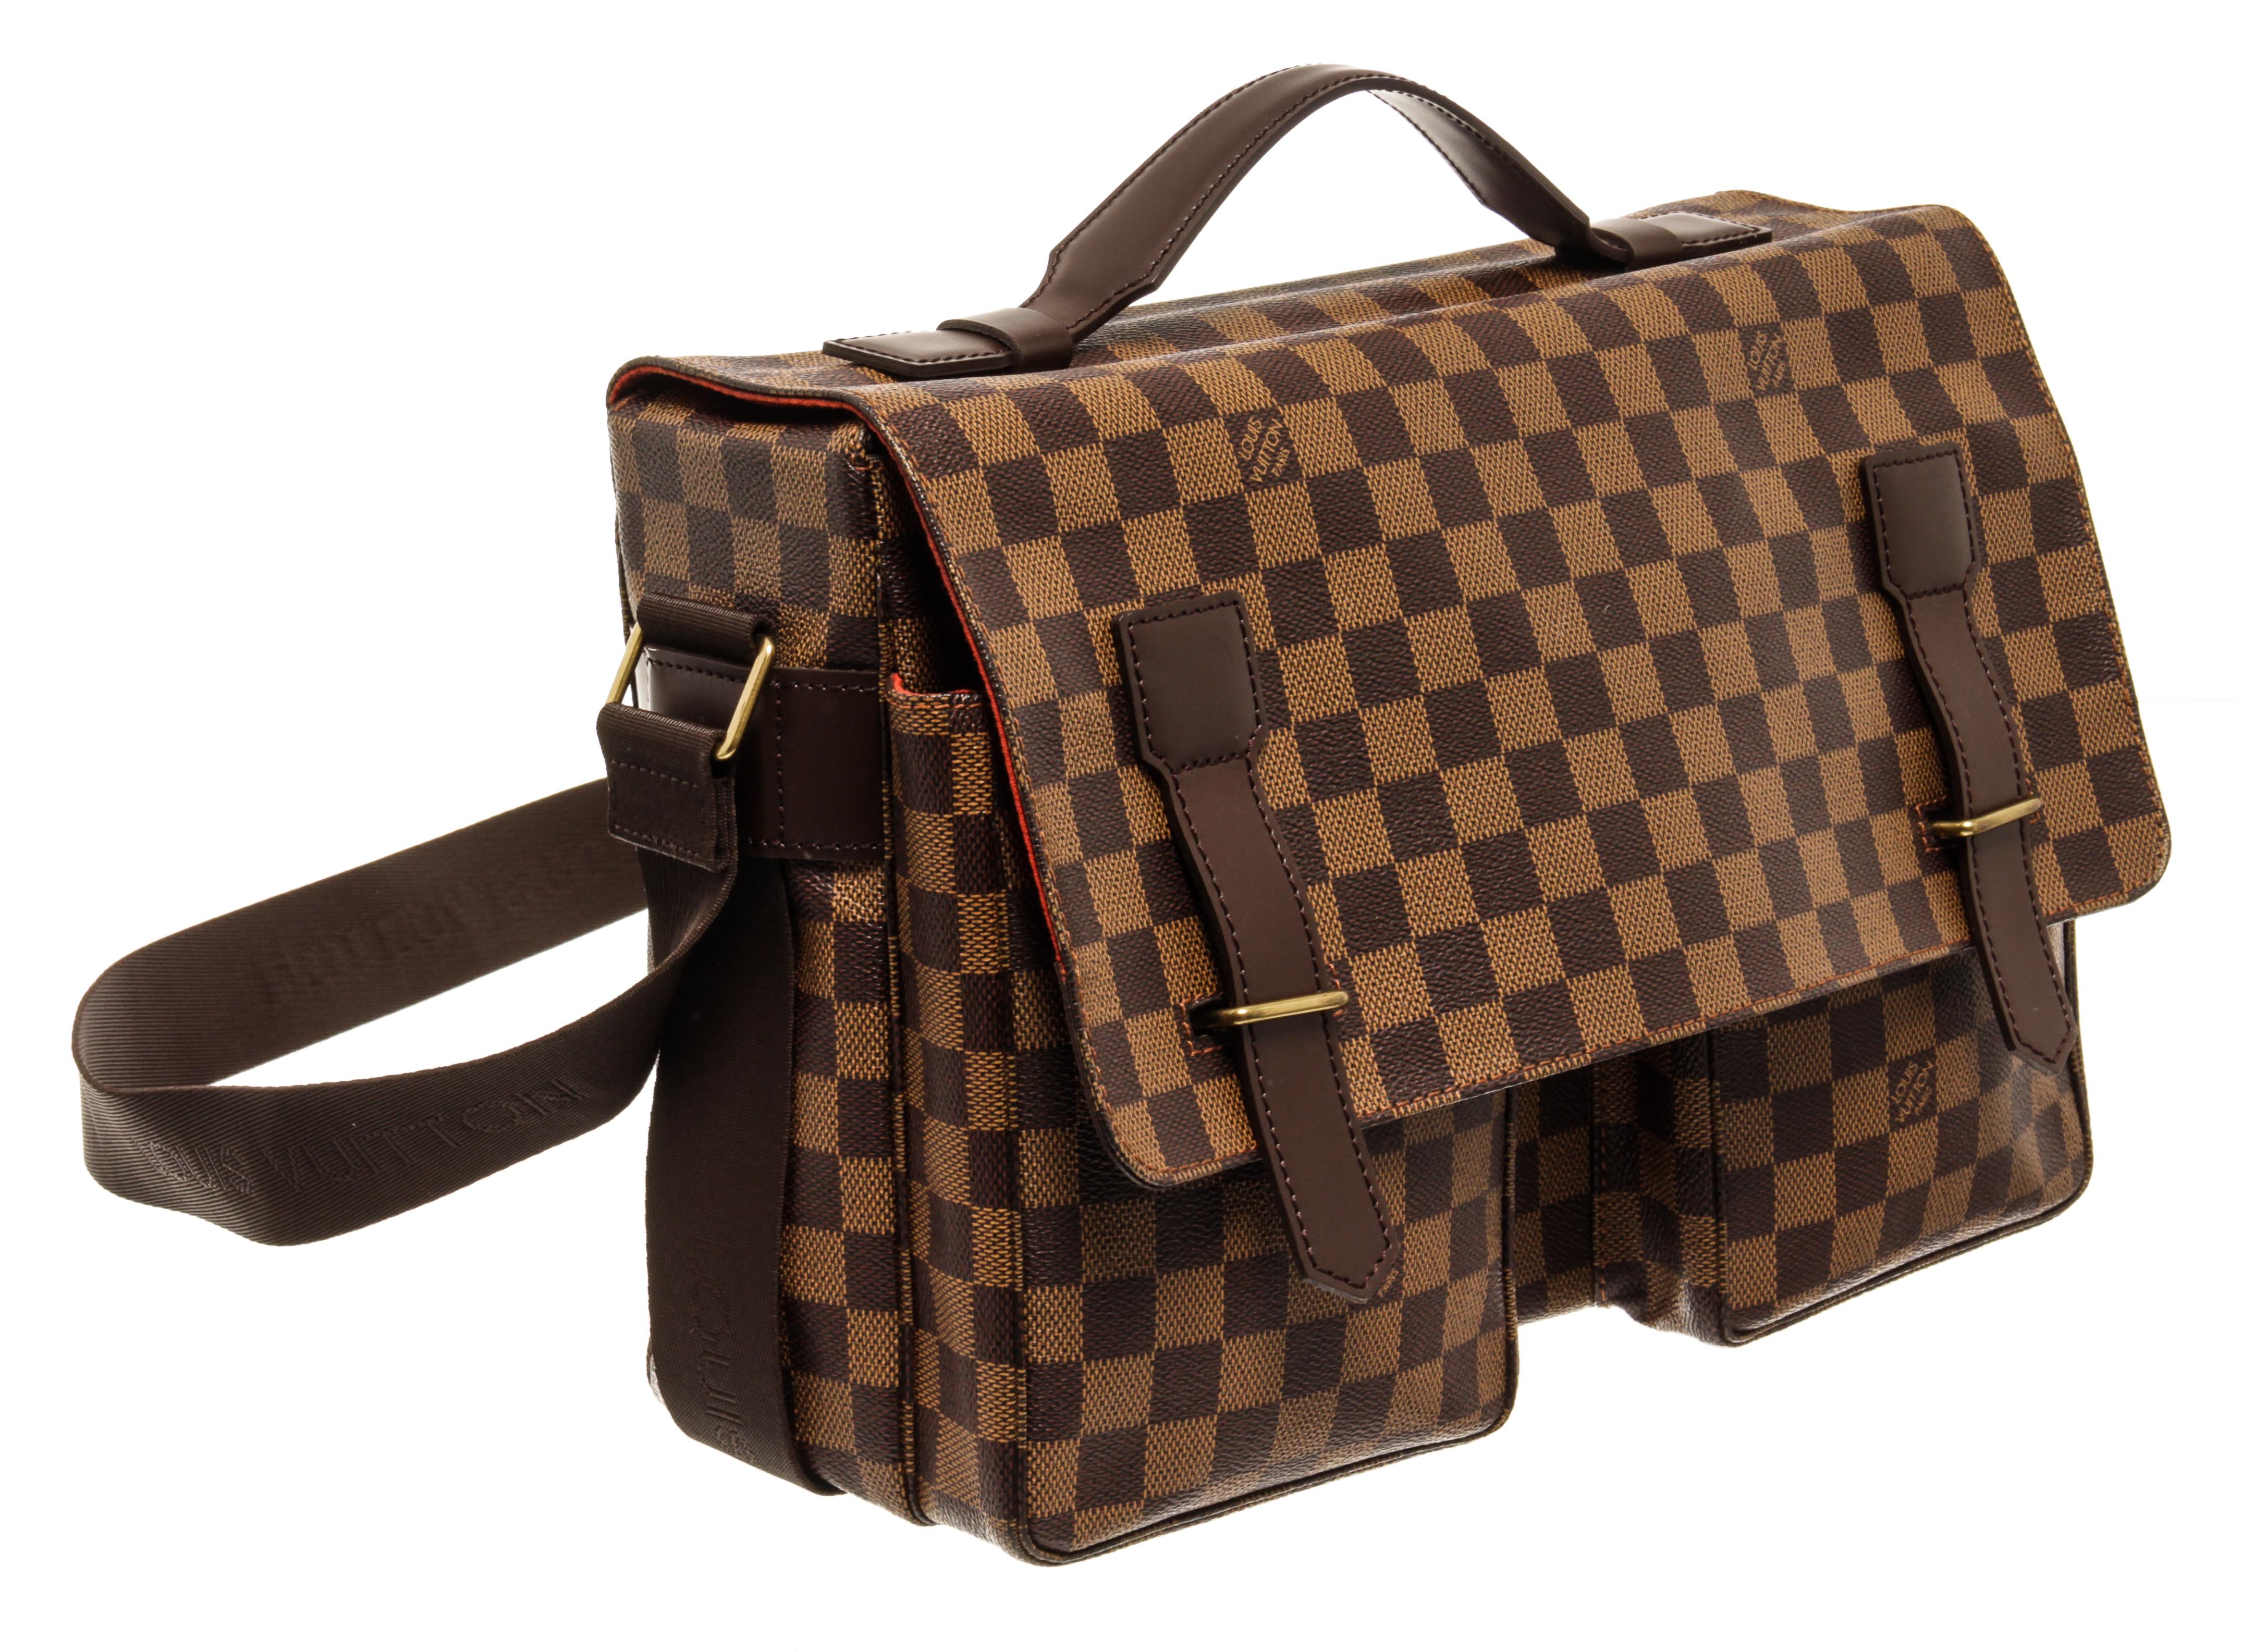 Louis Vuitton Damier Ebene Broadway crossbody bag with top handle, adjustable fabric strap, red fabric lining, two interior slip pockets, two exterior pockets on the front side, gold-tone hardware, and flap and strap closure.

60127MSC